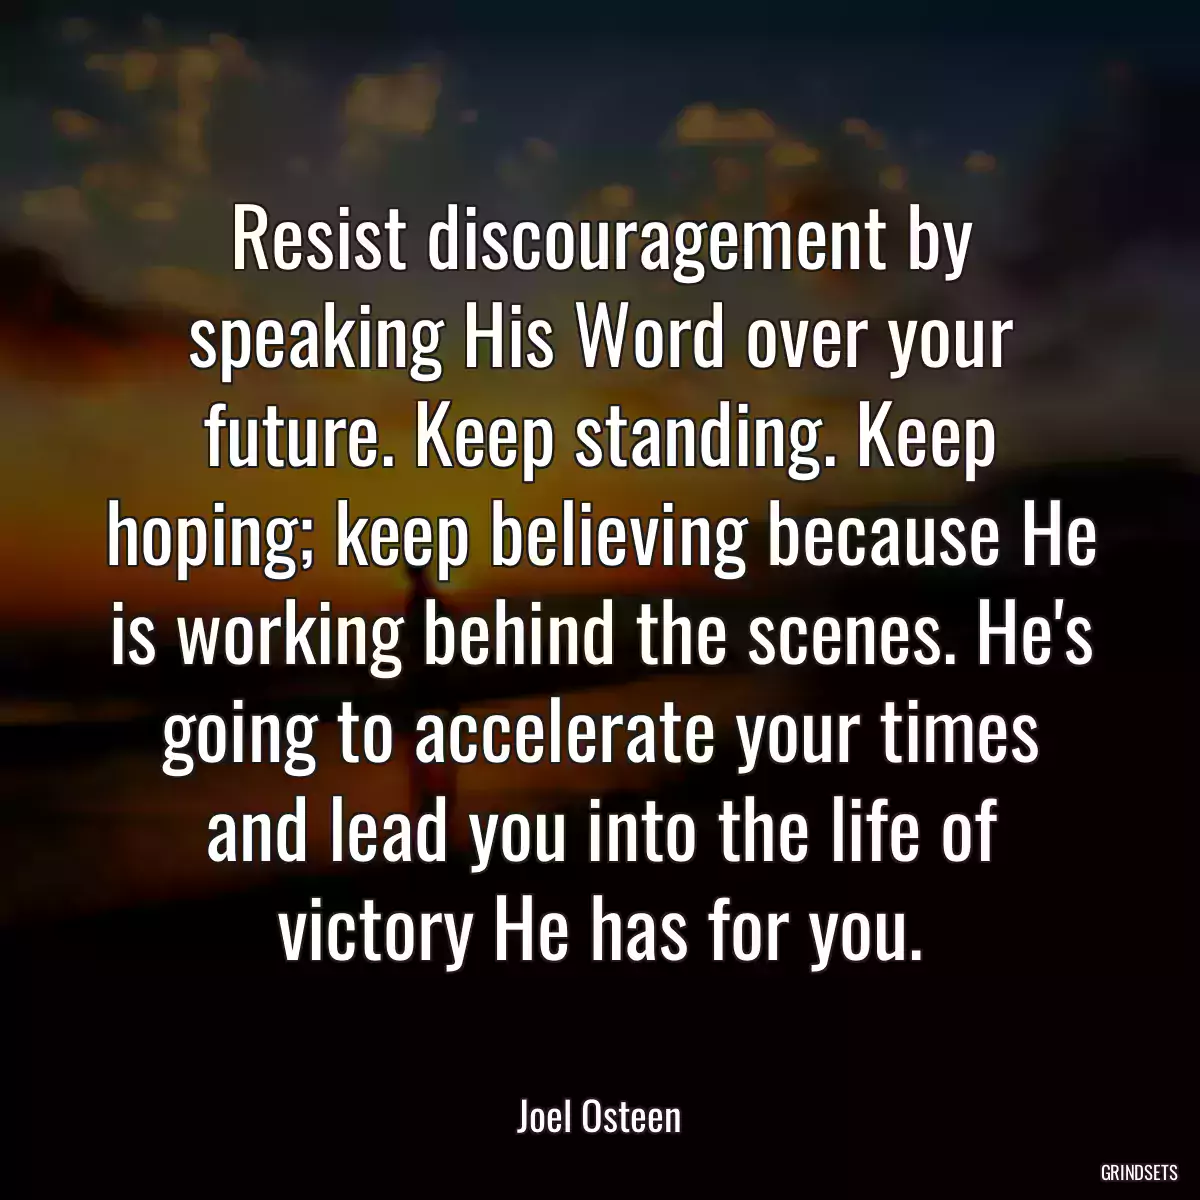 Resist discouragement by speaking His Word over your future. Keep standing. Keep hoping; keep believing because He is working behind the scenes. He\'s going to accelerate your times and lead you into the life of victory He has for you.